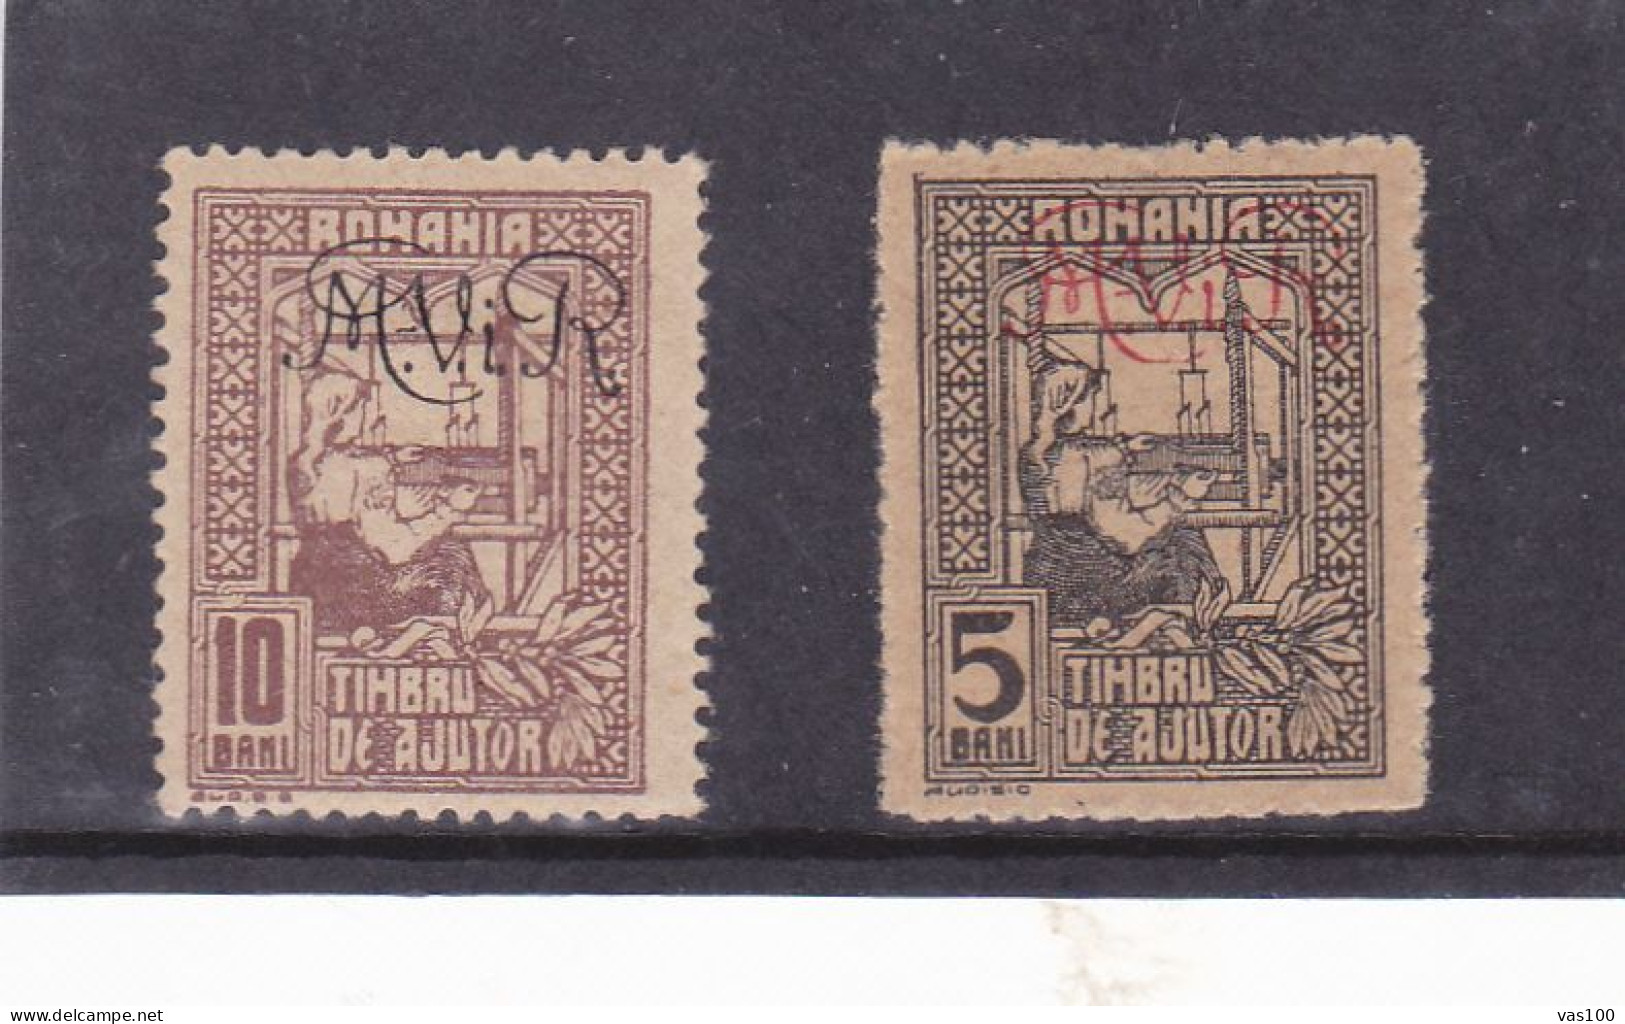 Germany WW1 Occupation In Romania 1917 MViR 5 +10 BANI 2 STAMPS POSTAGE DUE MINT - Occupazione